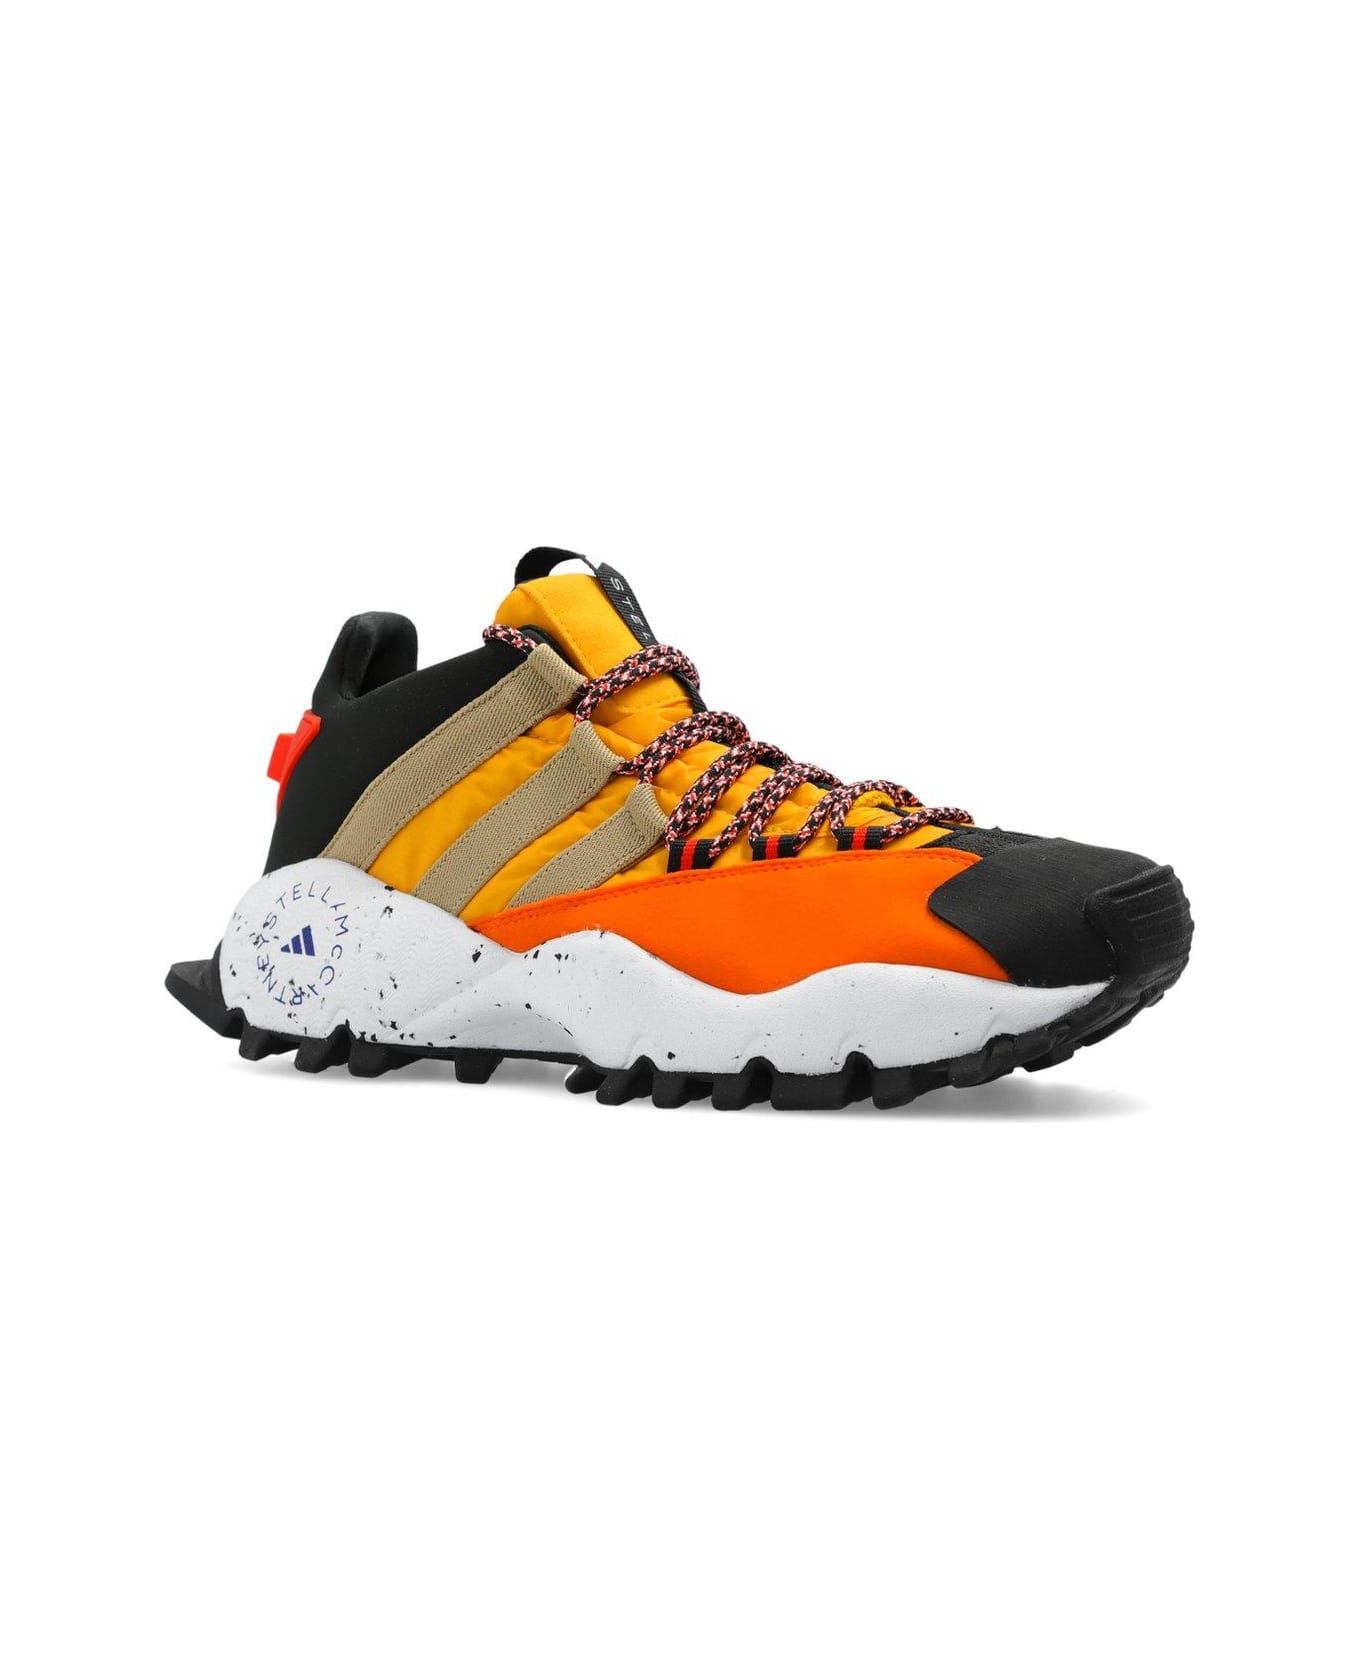 Adidas by Stella McCartney Seeulater Lace-up Sneakers - ORANGE スニーカー